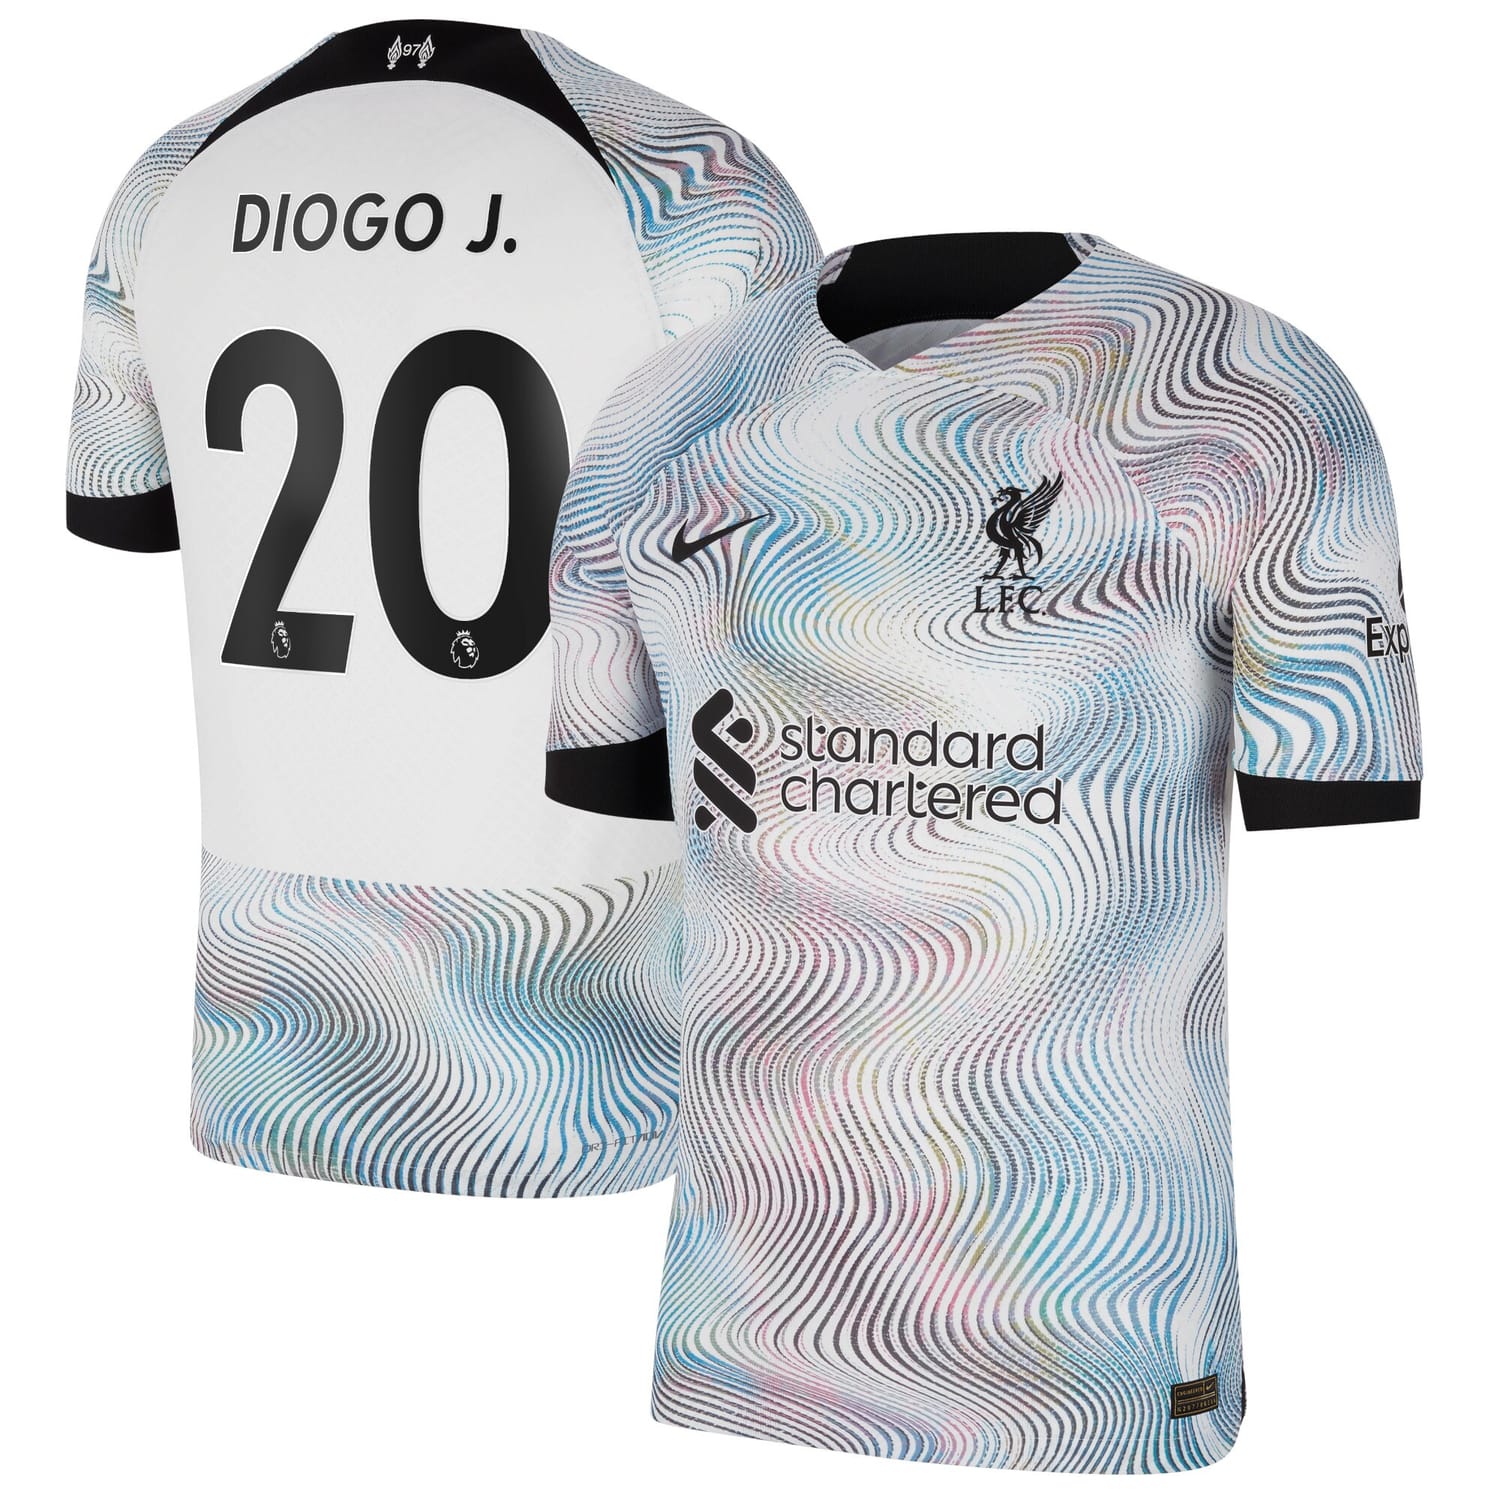 Premier League Liverpool Away Authentic Jersey Shirt 2022-23 player Diogo Jota 20 printing for Men